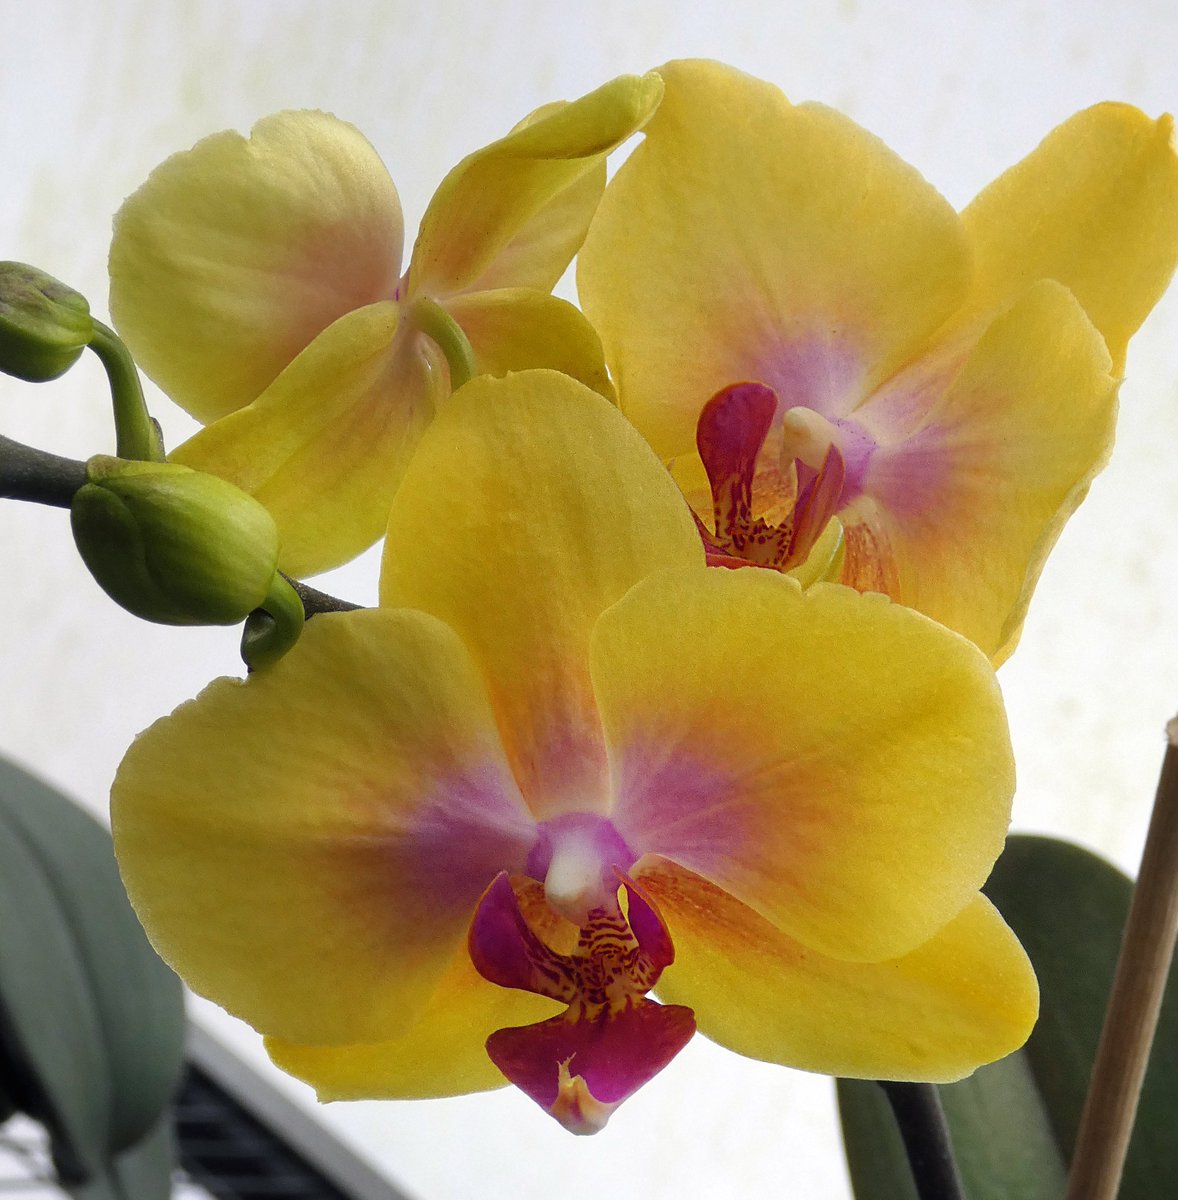 @ViewFromShikhar Share something yellow from your gallery

Yellow Dendrobium Orchid in bloom
Orquídeas Runtun, Ecuador